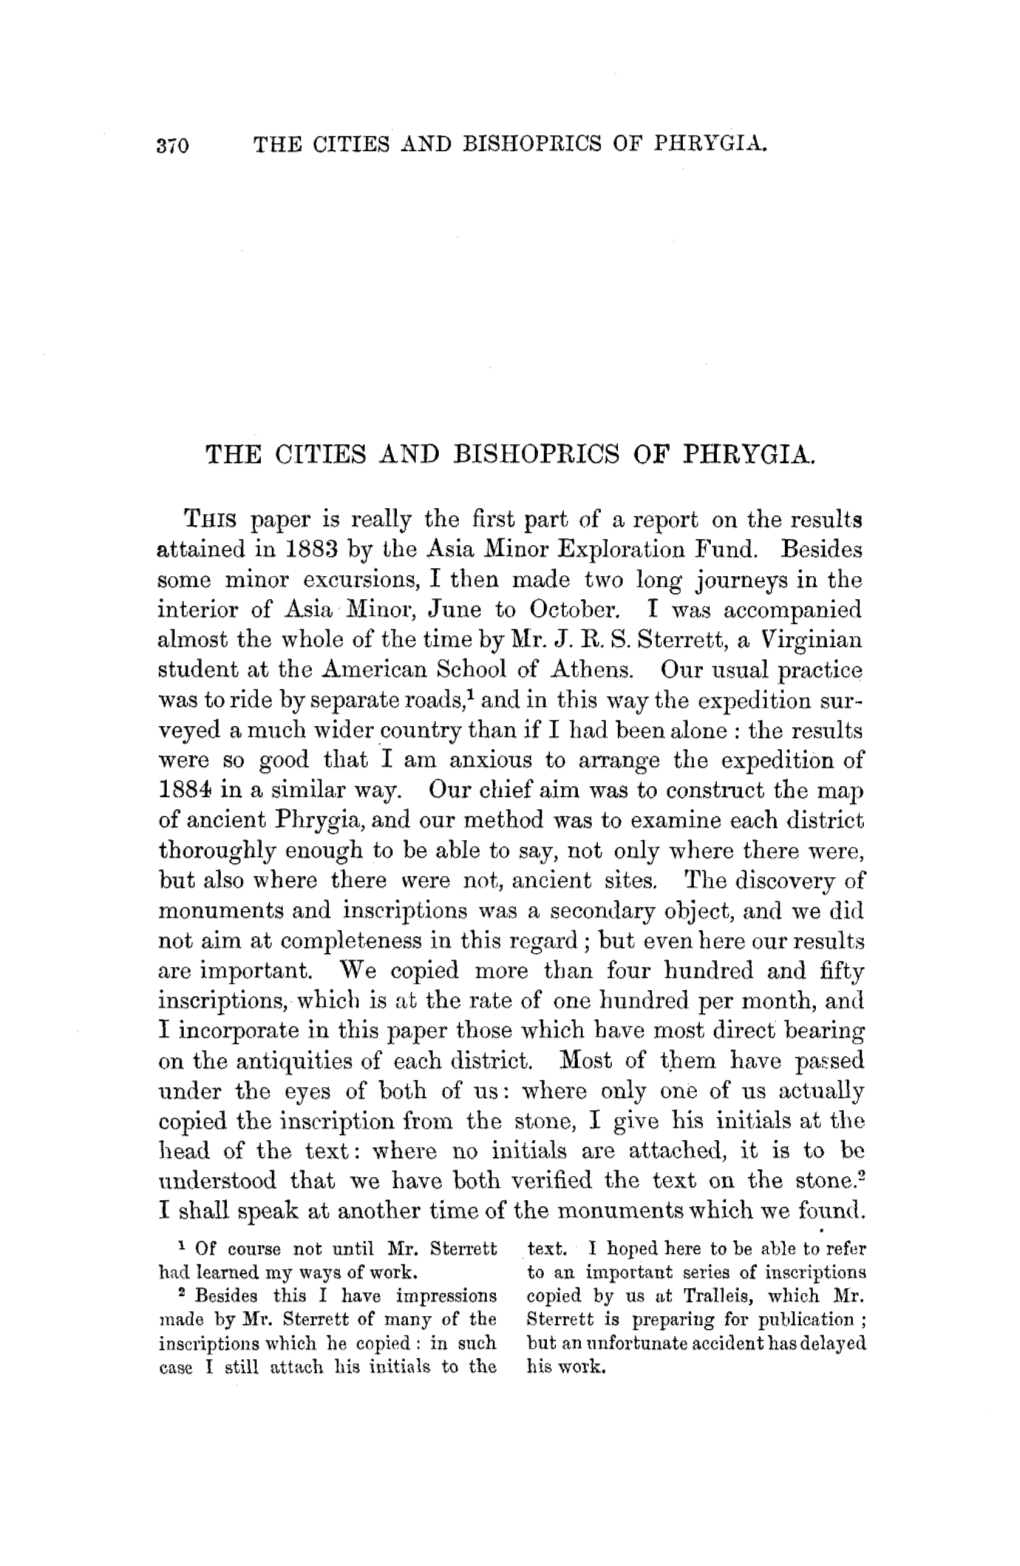 THE CITIES and BISHOPRICS of PHRYGIA. THIS Paper Is Really the First Part of a Report on the Results Attained in 1883 by The